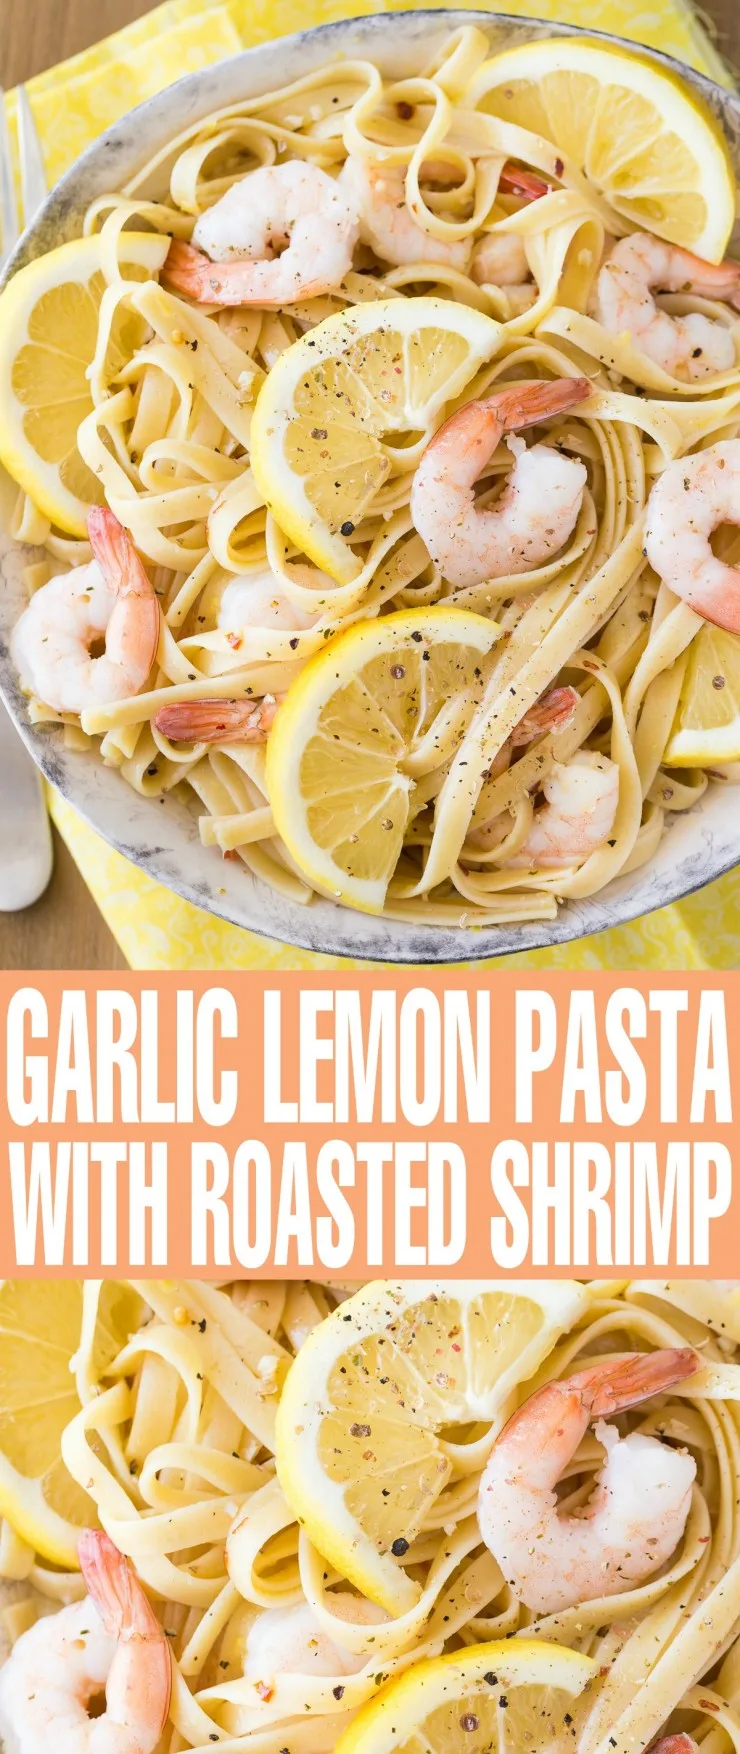 This recipe for Garlic Lemon Pasta with Roasted Shrimp is quick and easy with very fresh and delicious tasting results your whole family will love. This is definitely a recipe for anyone like me who loves garlic and lemon.